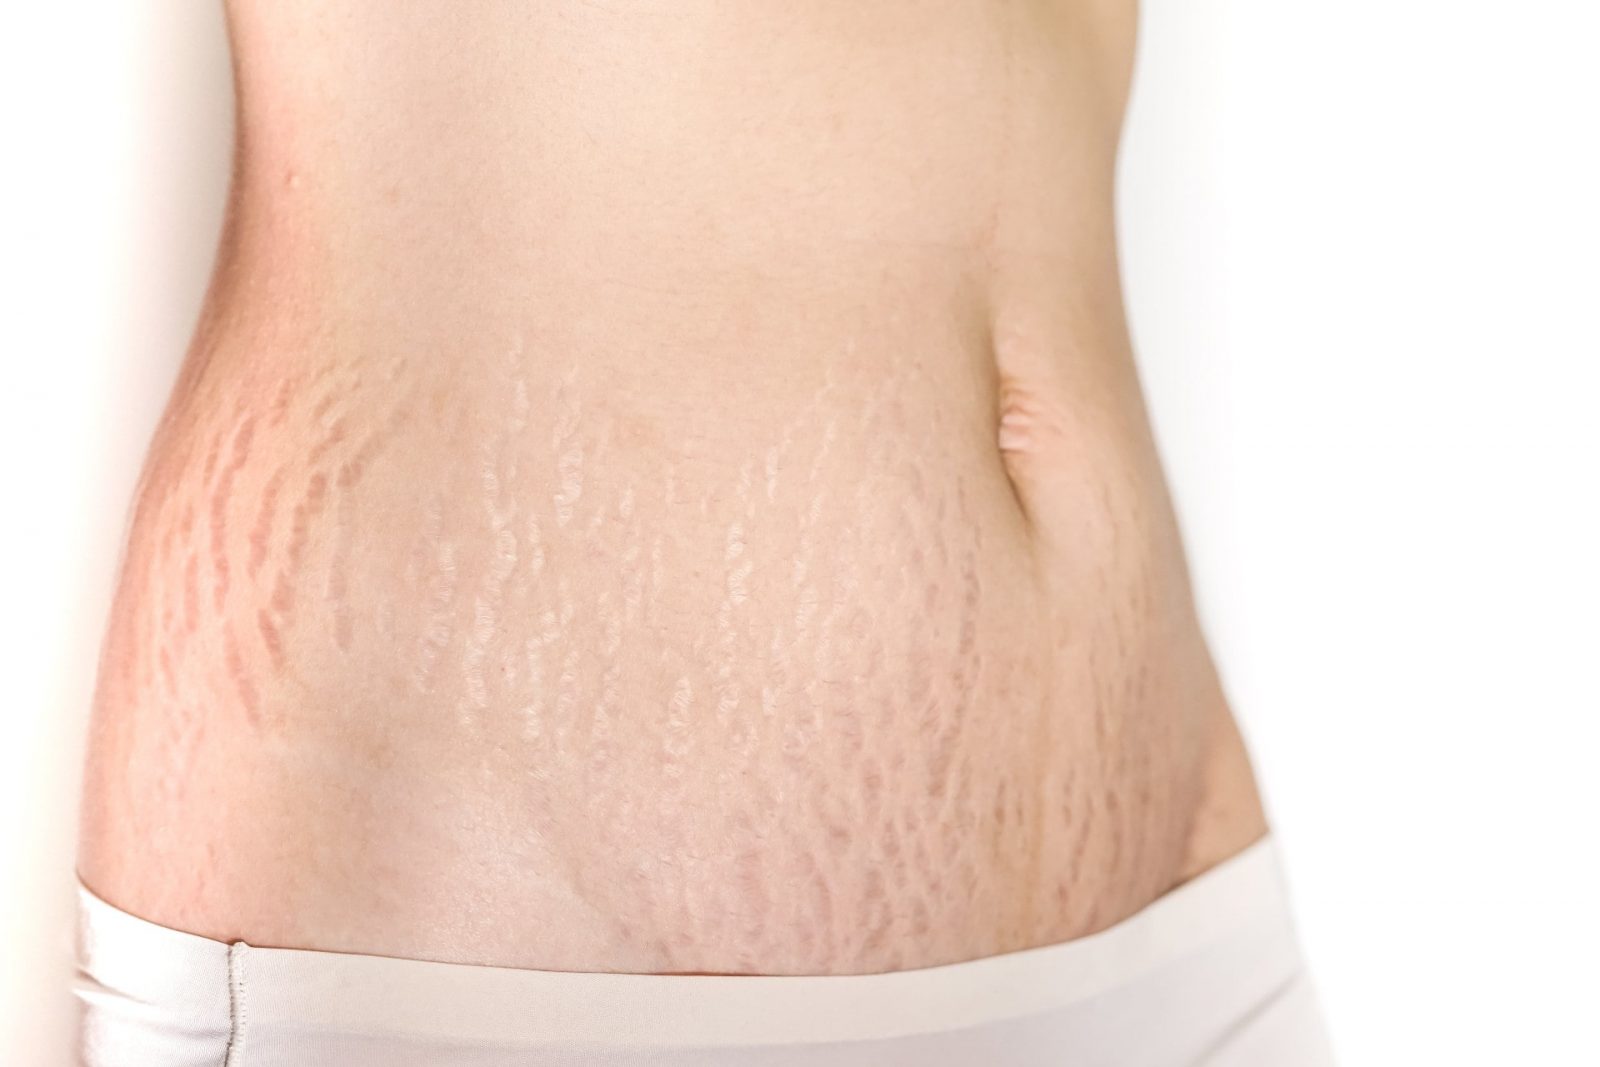 Stretch Marks and Common Treatment